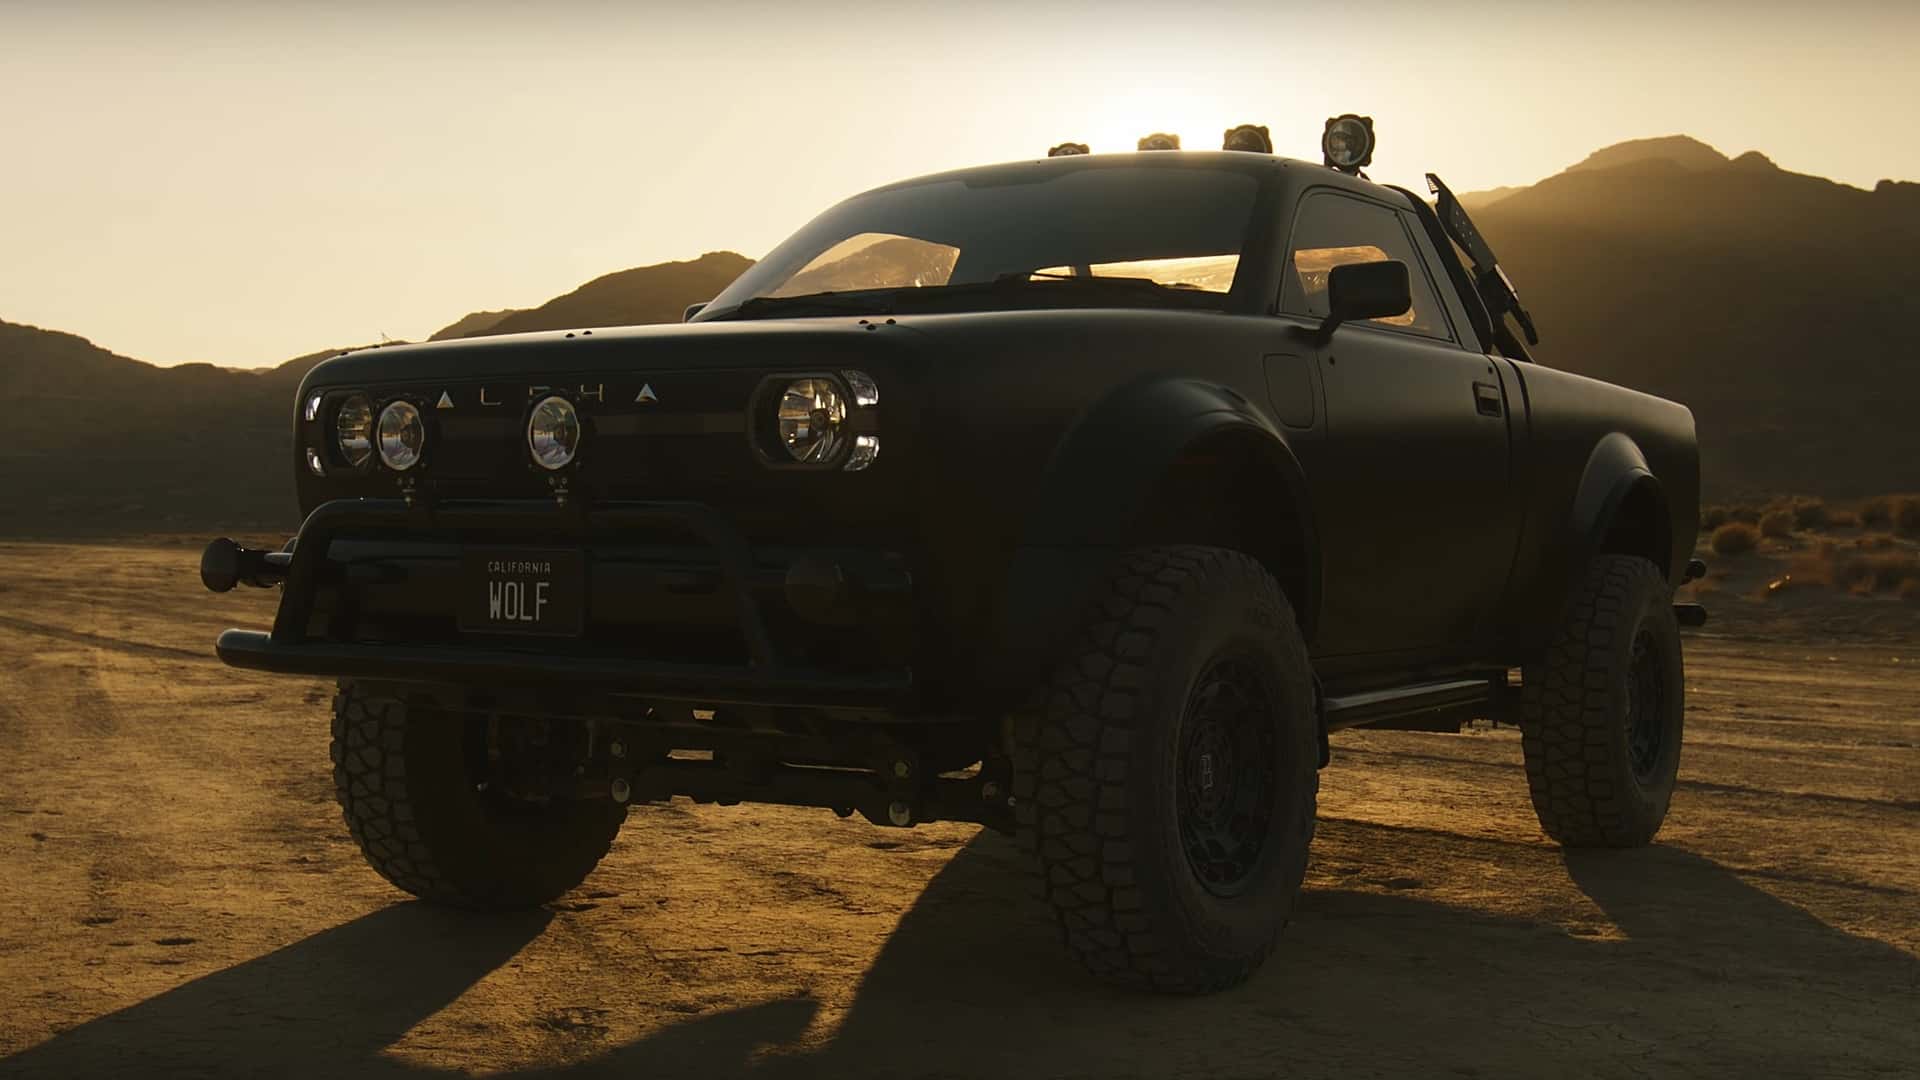 alpha motor shows wolf pickup working prototype, offers more details